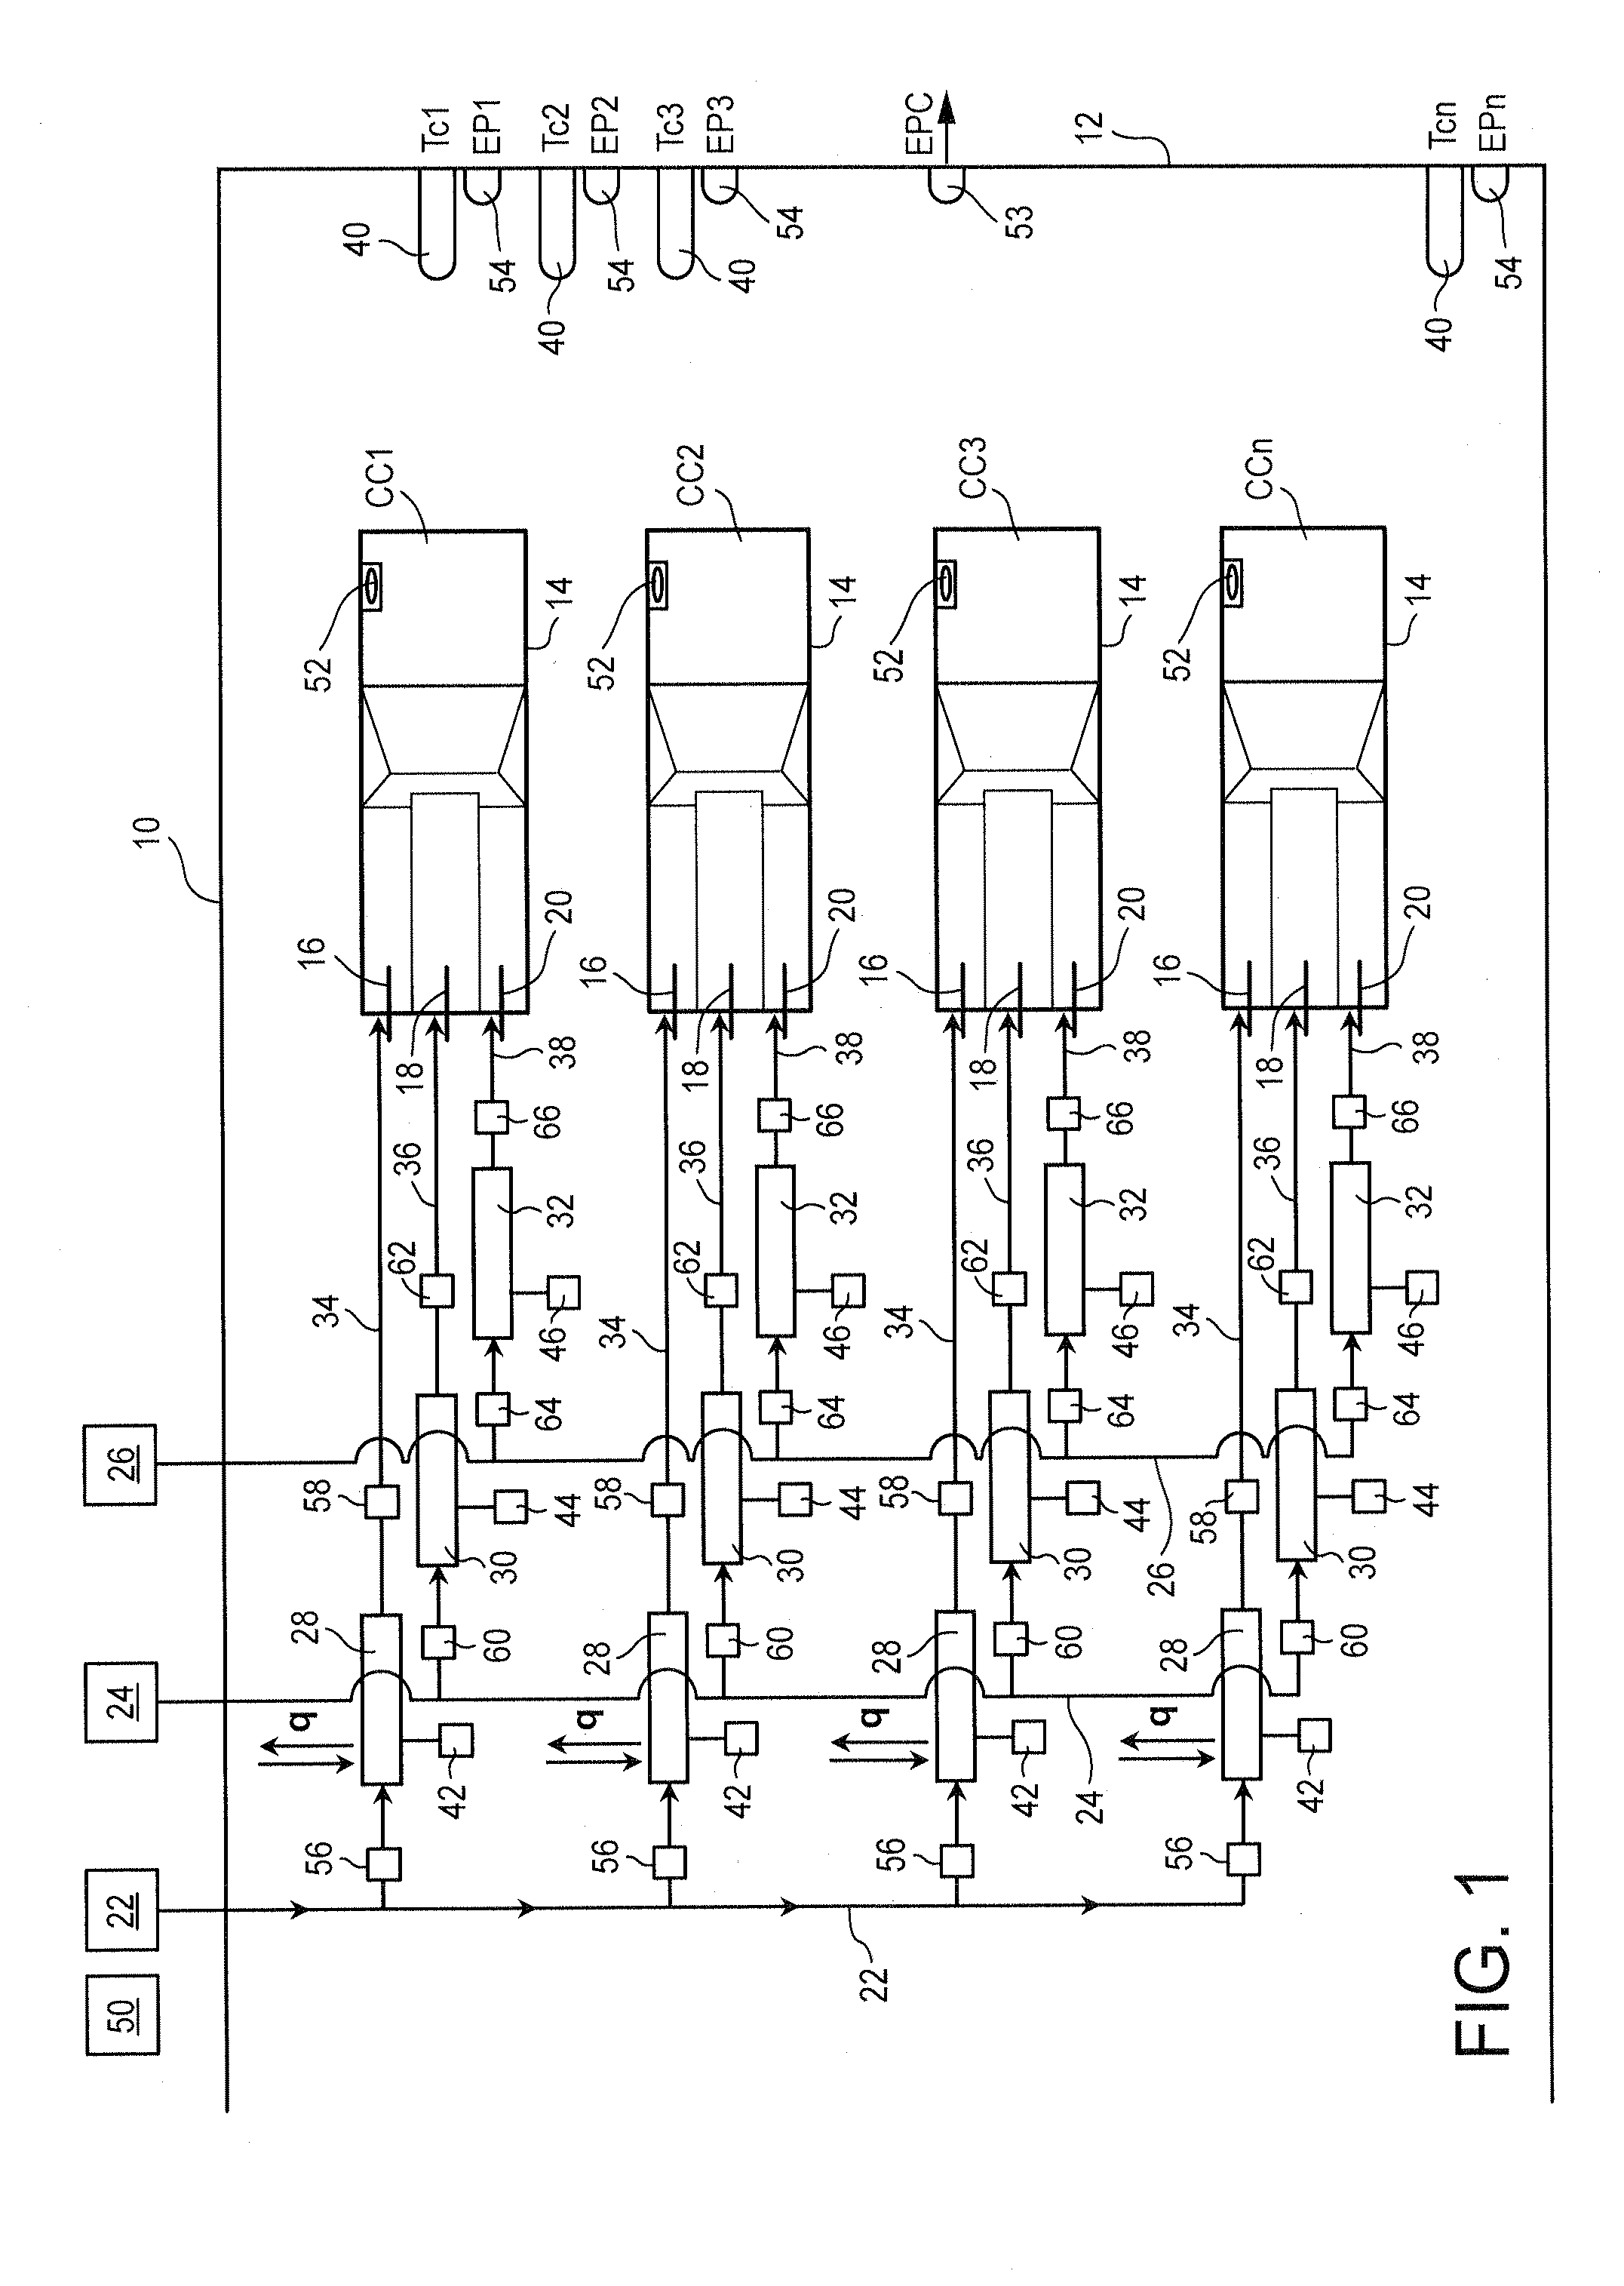 Systems and methods for bulk temperature variation reduction of a gas turbine through can-to-can fuel temperature modulation